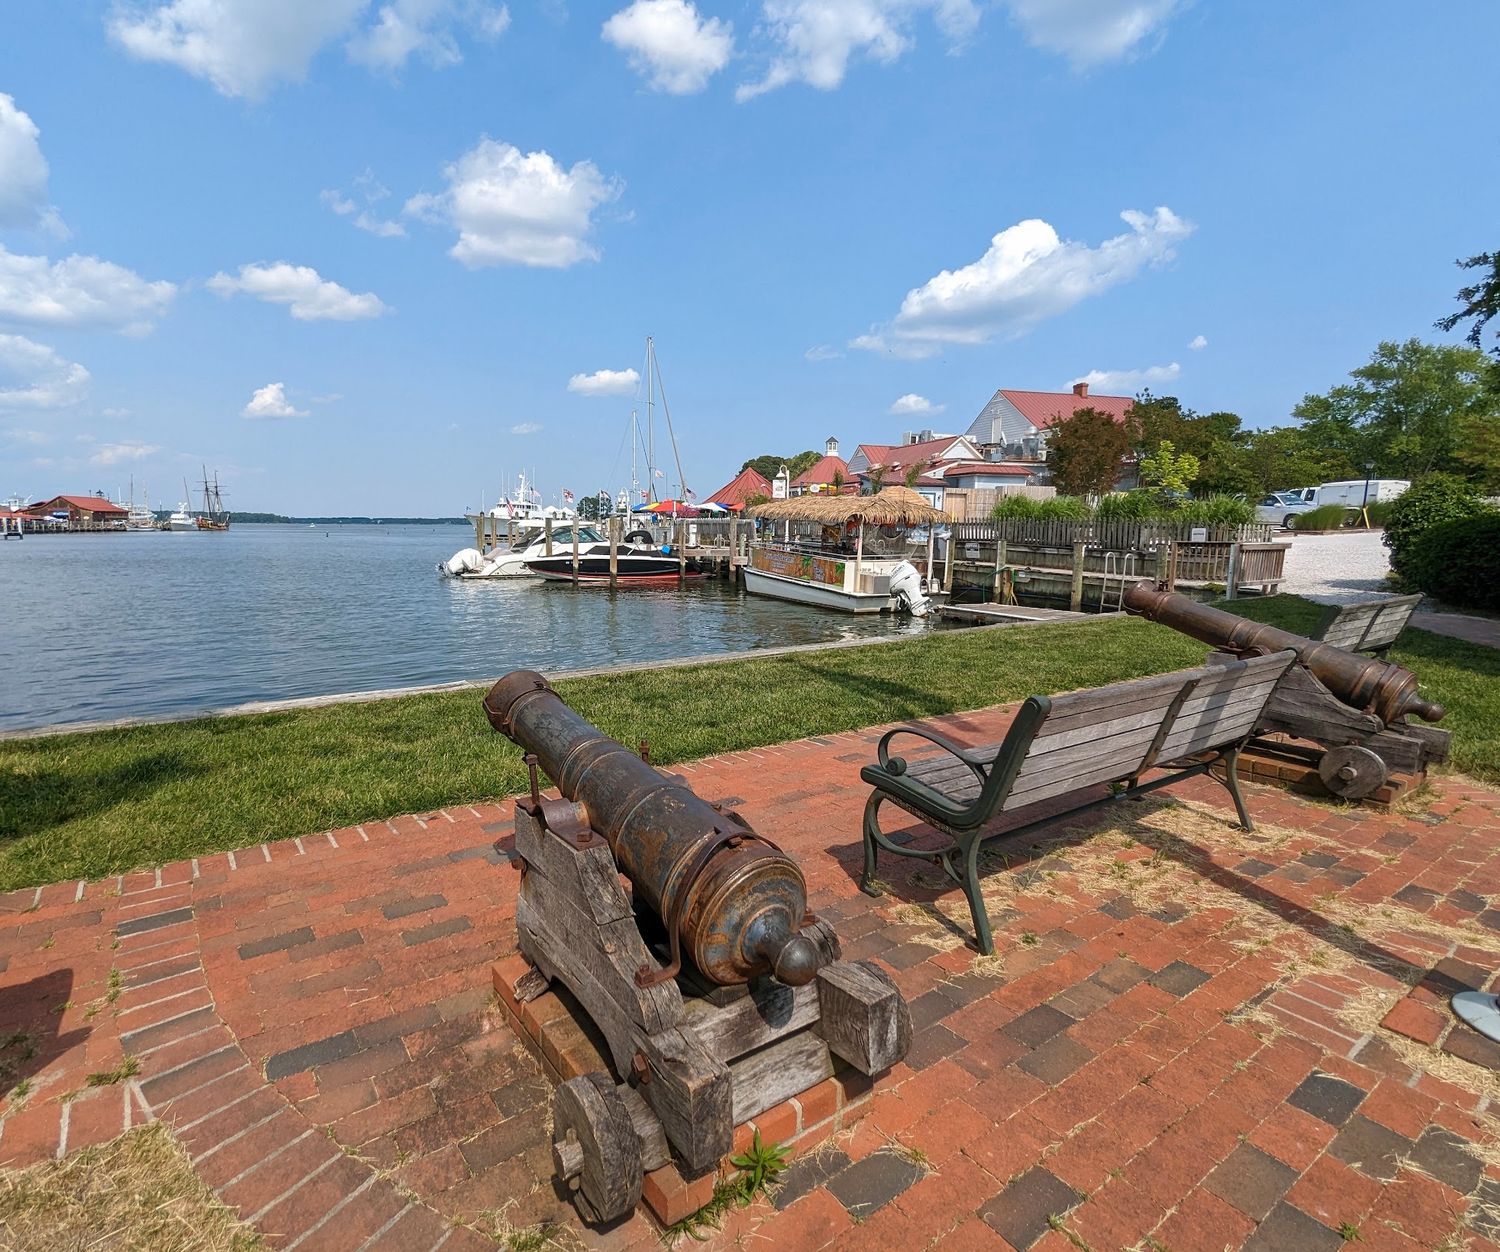 A bench and canon overlooking the marina at Muskrat Park in St. Michaels, MD.